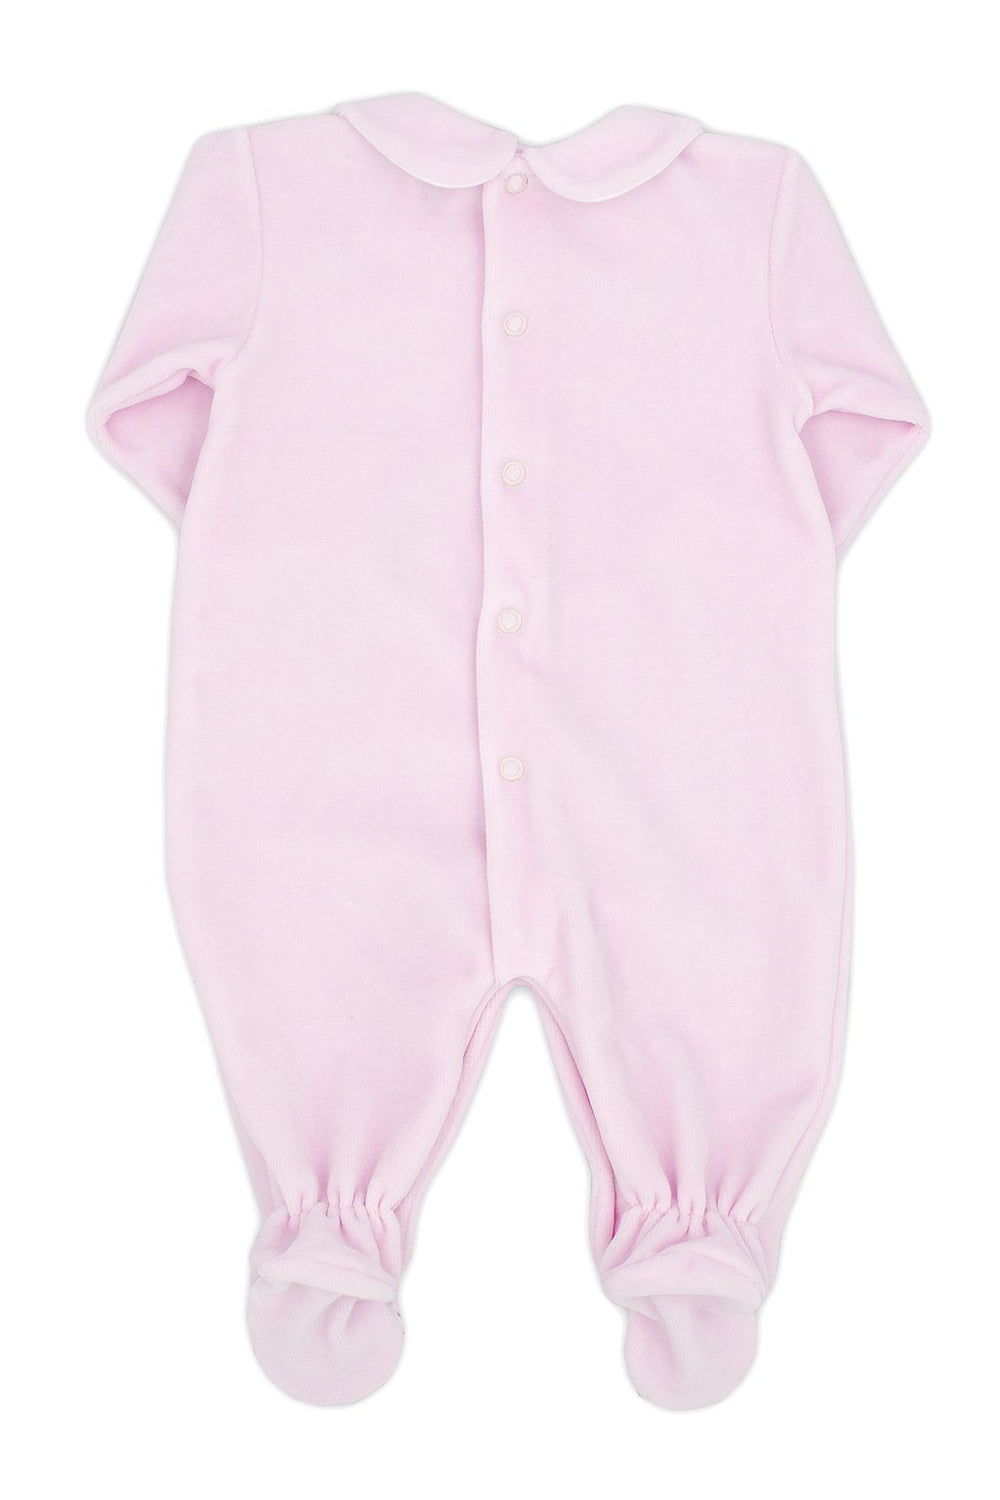 Rapife "Iris" Pink Velour Ditsy Floral Sleepsuit | Millie and John